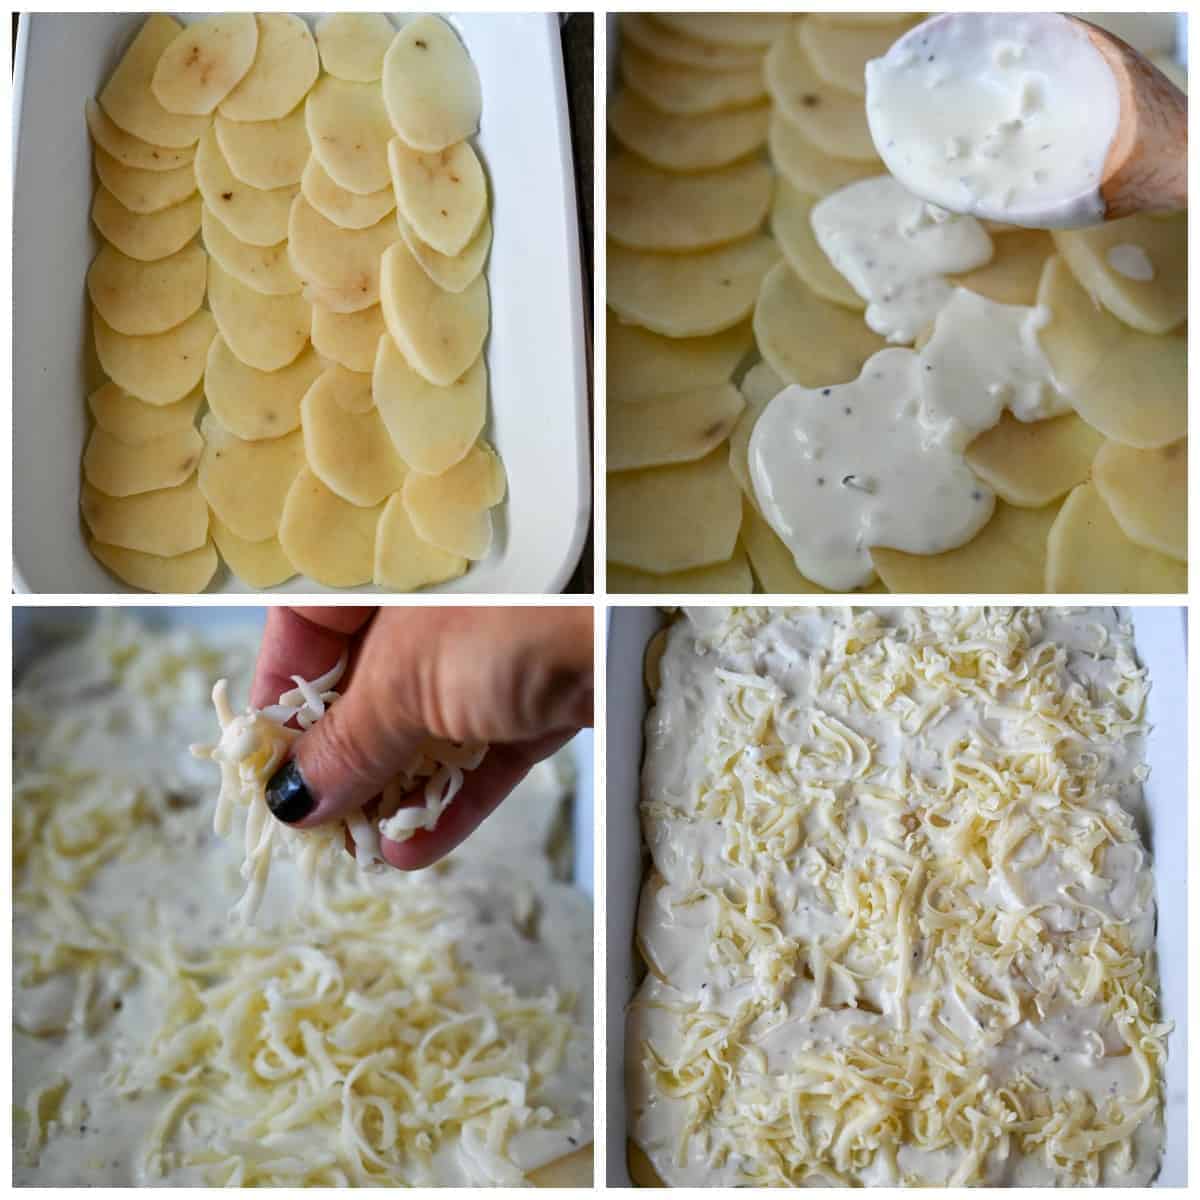 Four process pjotos. First one, sliced potatoes all layed in a white casserole dish. Second one, sauce being poured over potato layer. Third one, cheese sprinkled on top of sauce. Fourth one, final layer with cheese on top.